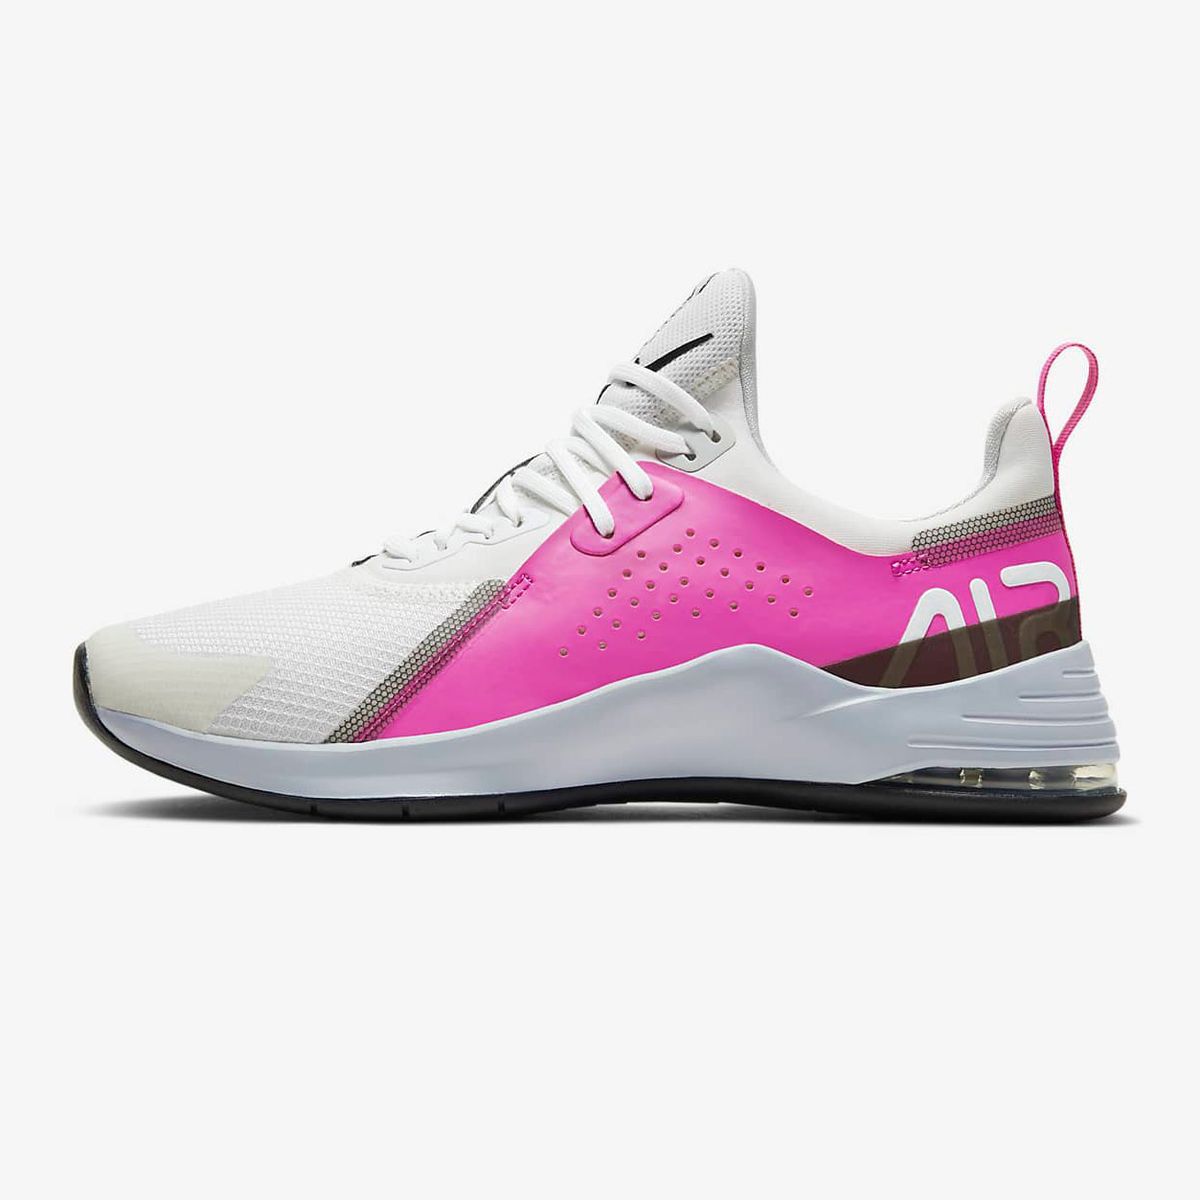 womens bright colored tennis shoes